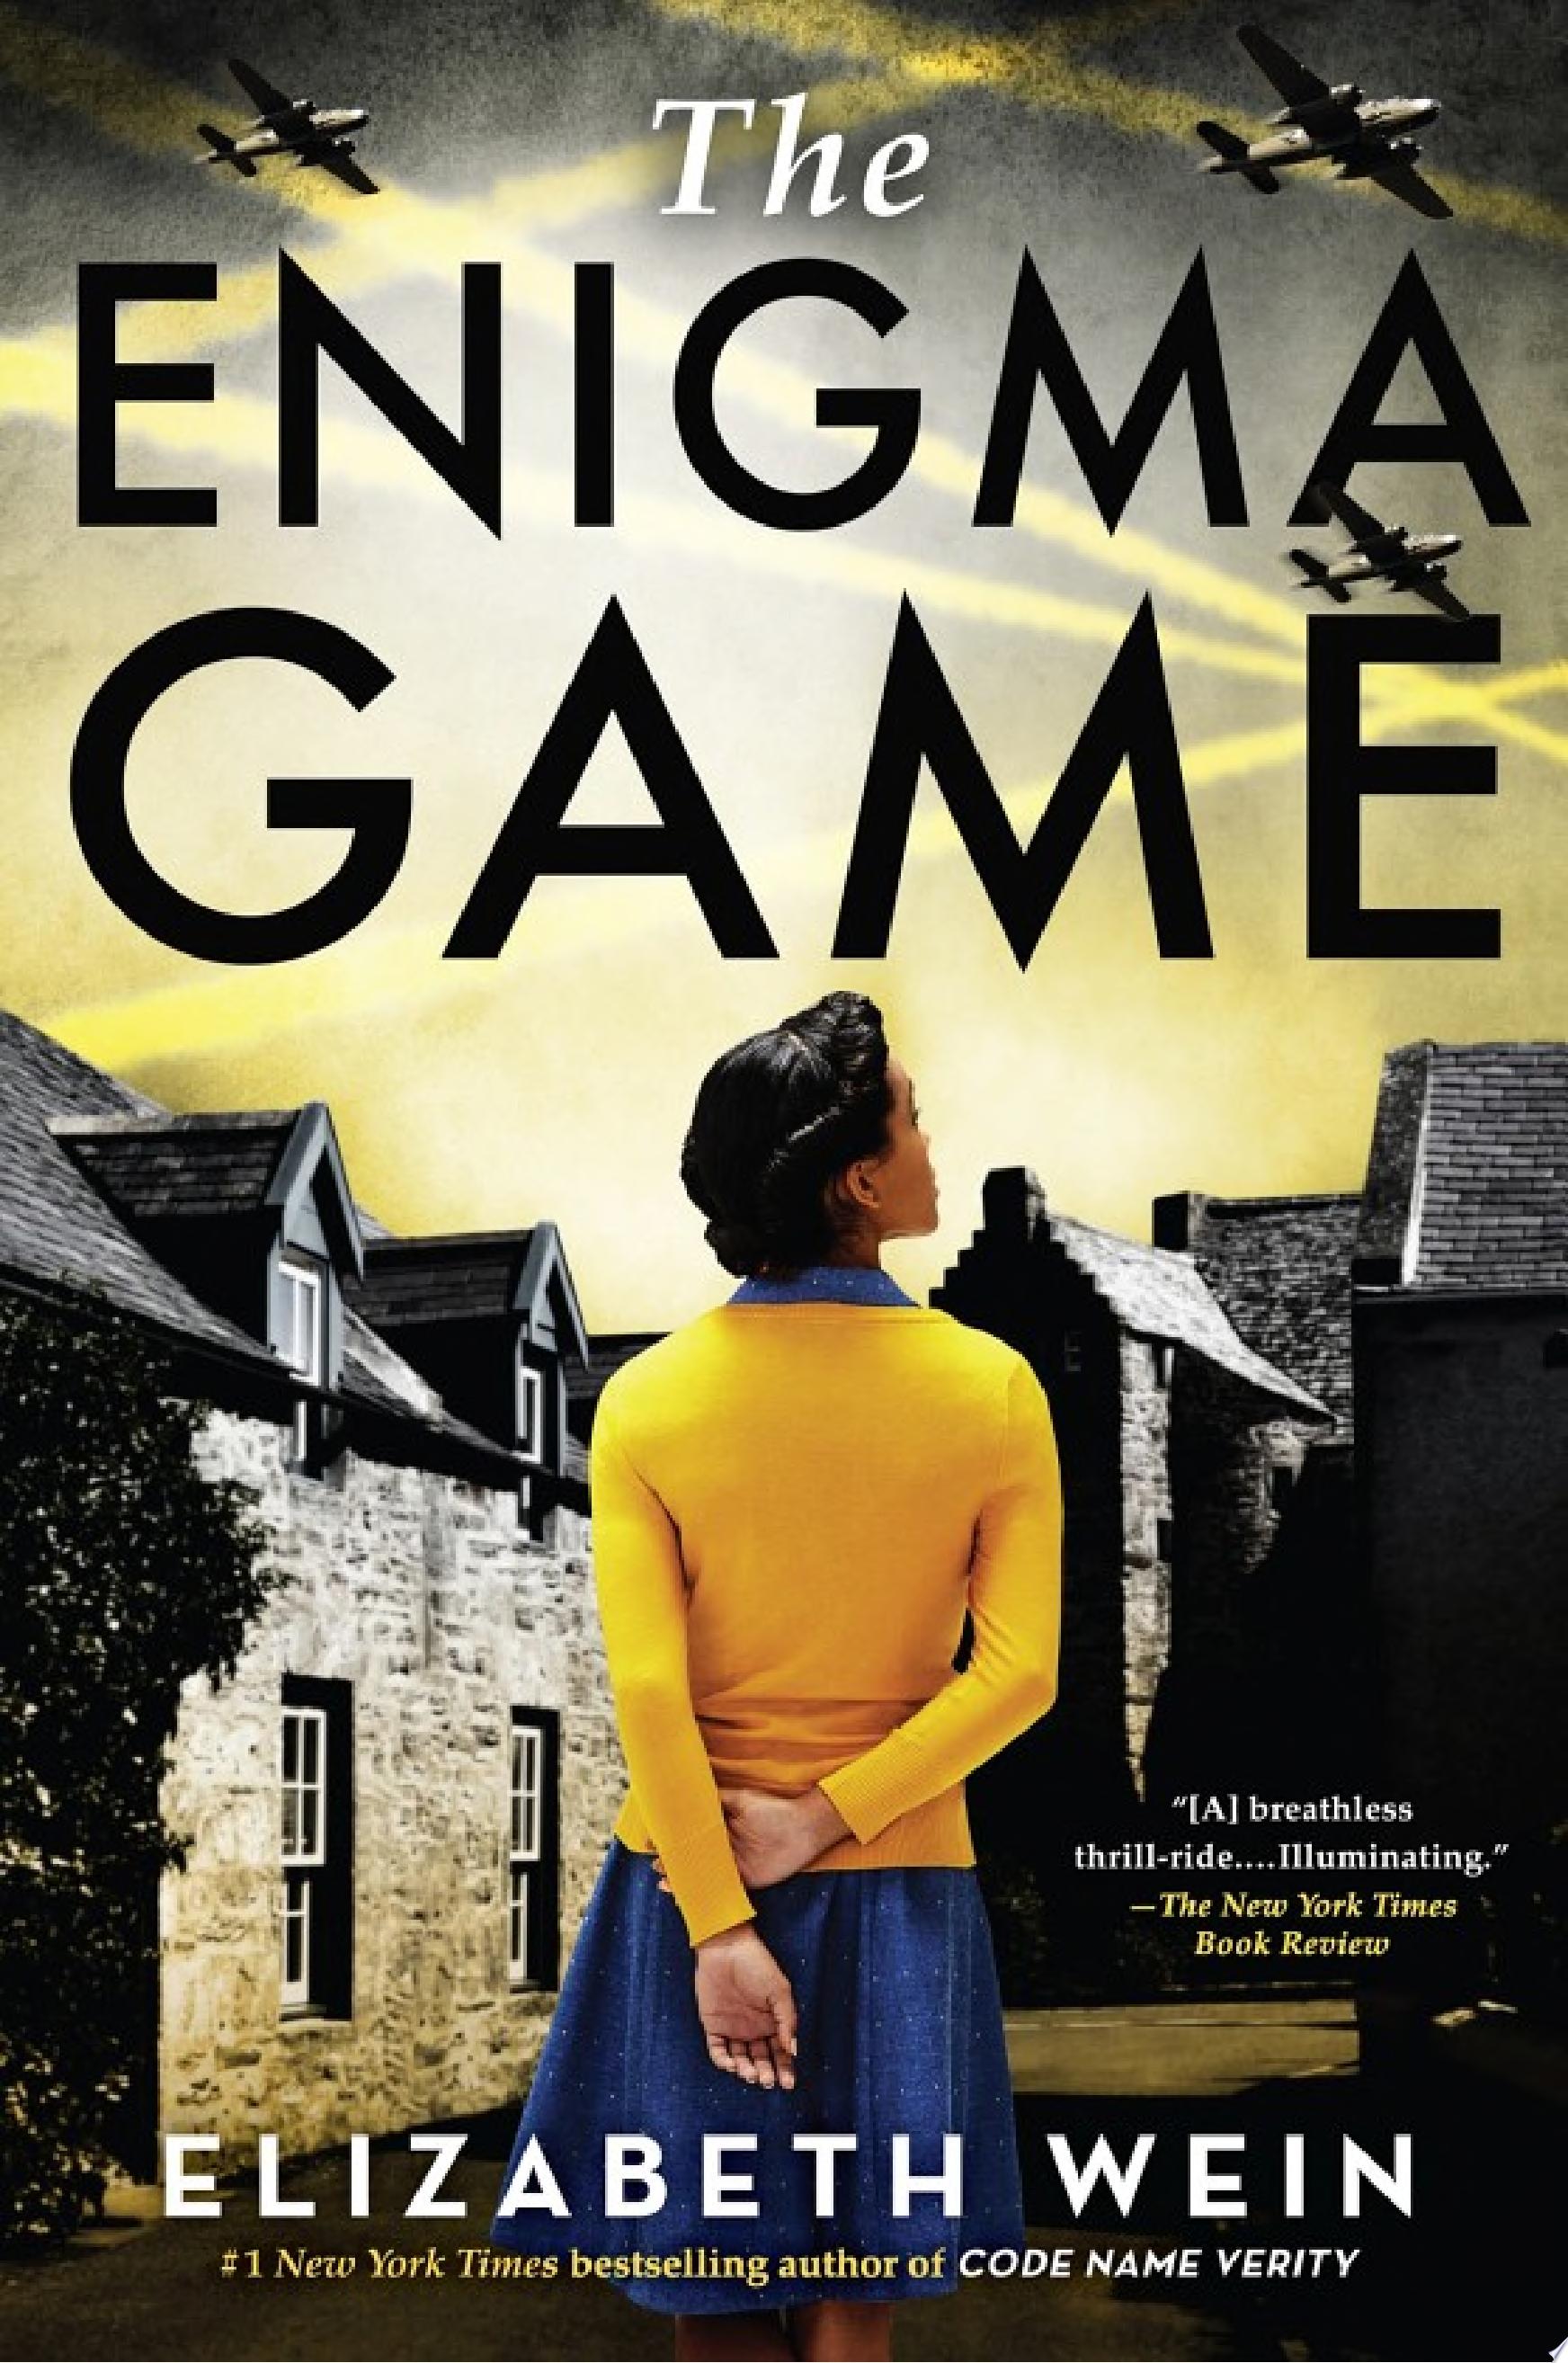 Image for "The Enigma Game"